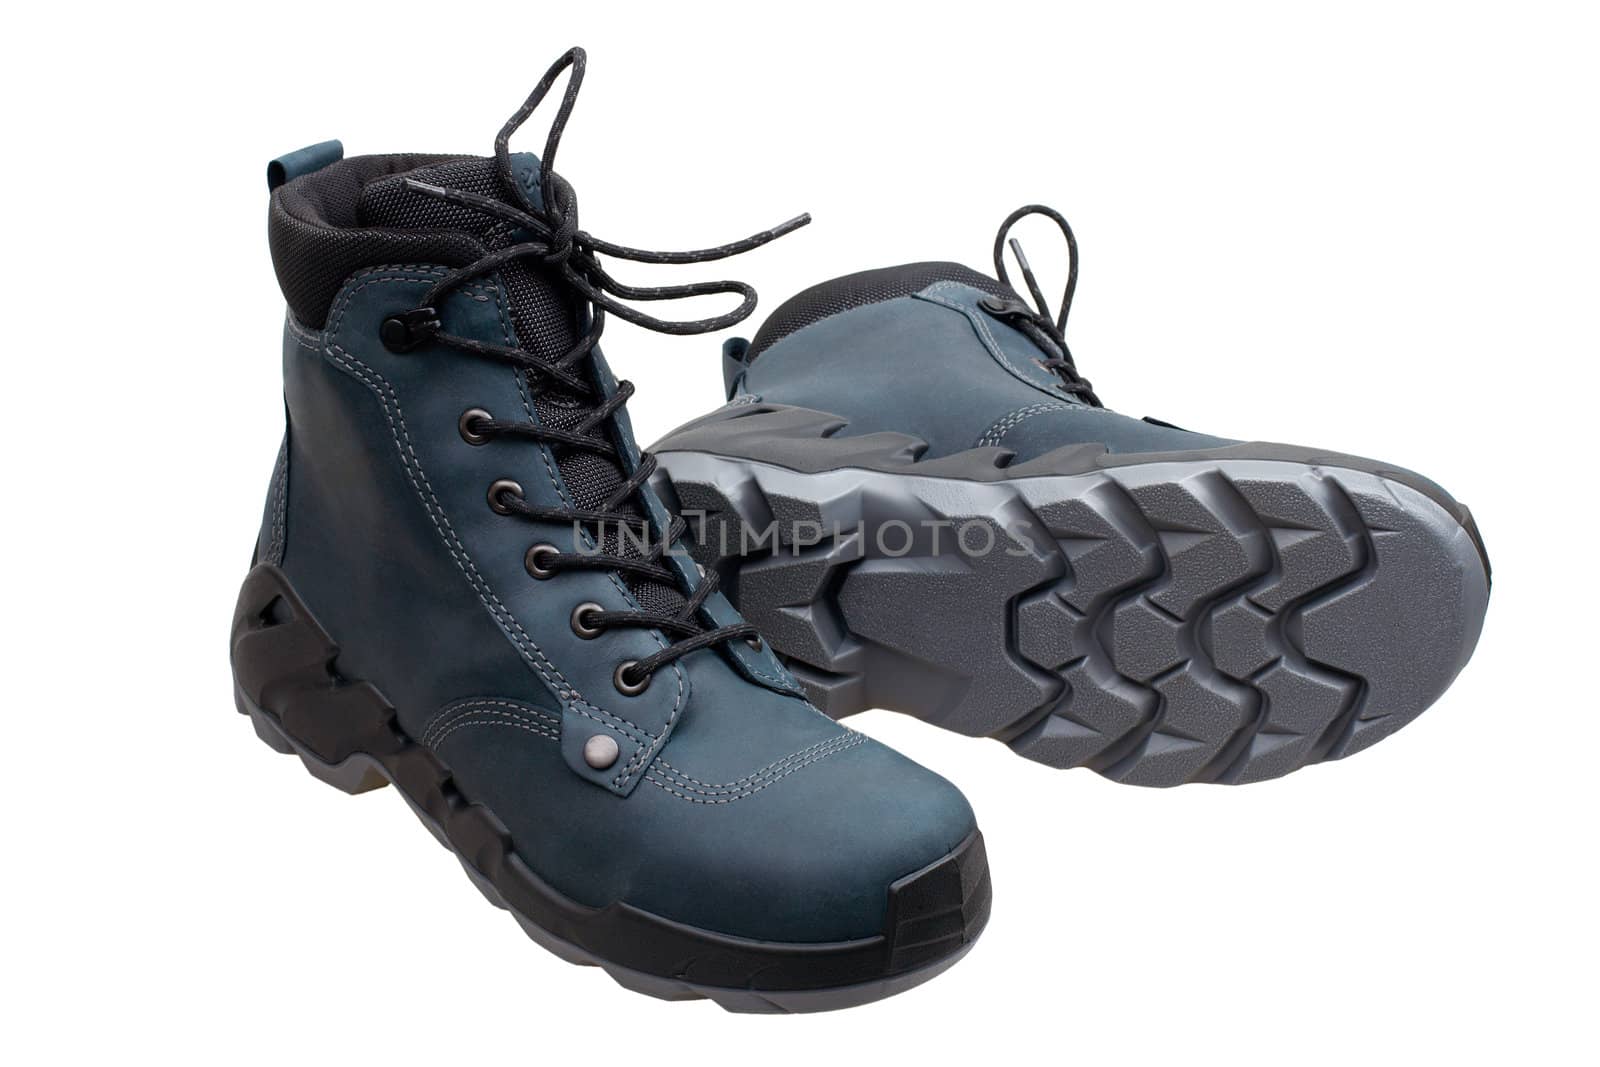 Pair of hiking shoes on white background